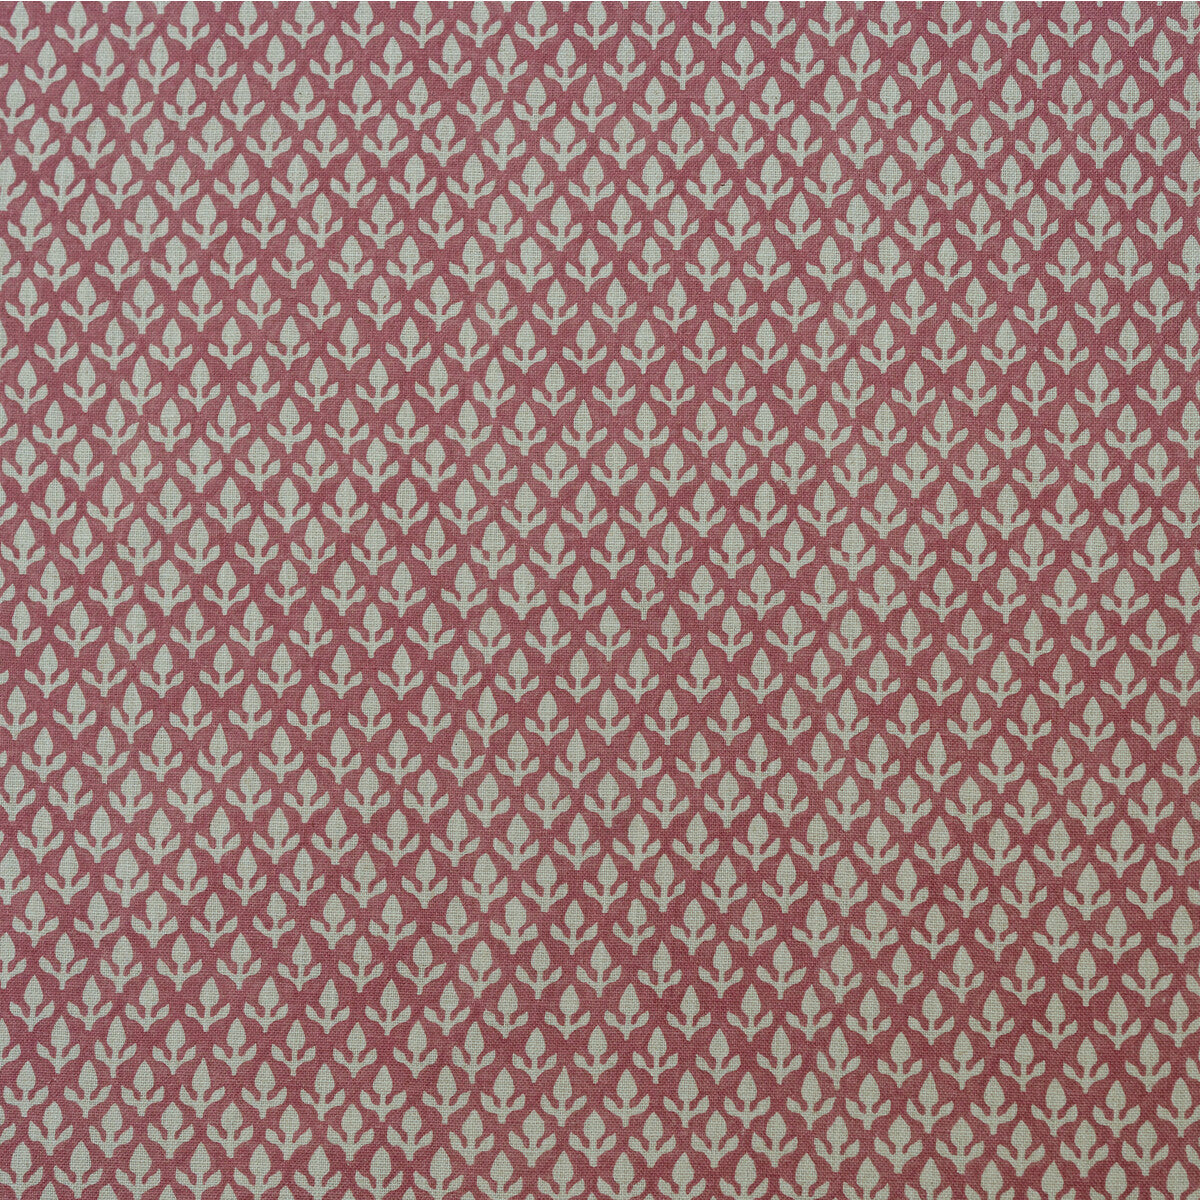 Bud fabric in pink color - pattern AM100379.77.0 - by Kravet Couture in the Andrew Martin Garden Path collection